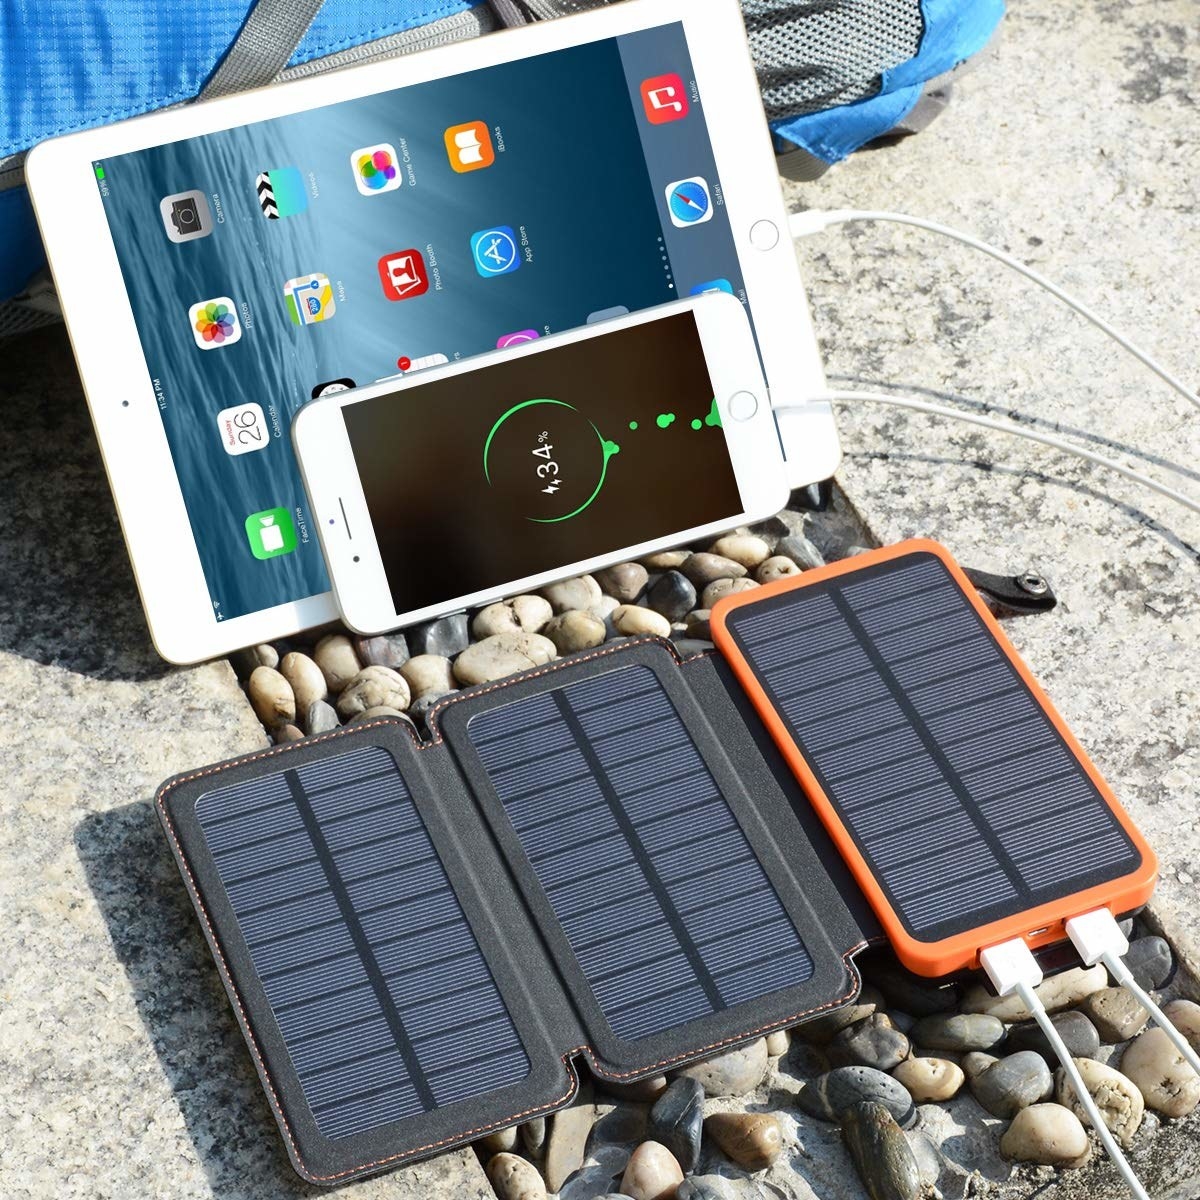 The solar bank resting on a rock with gadgets plugged into it